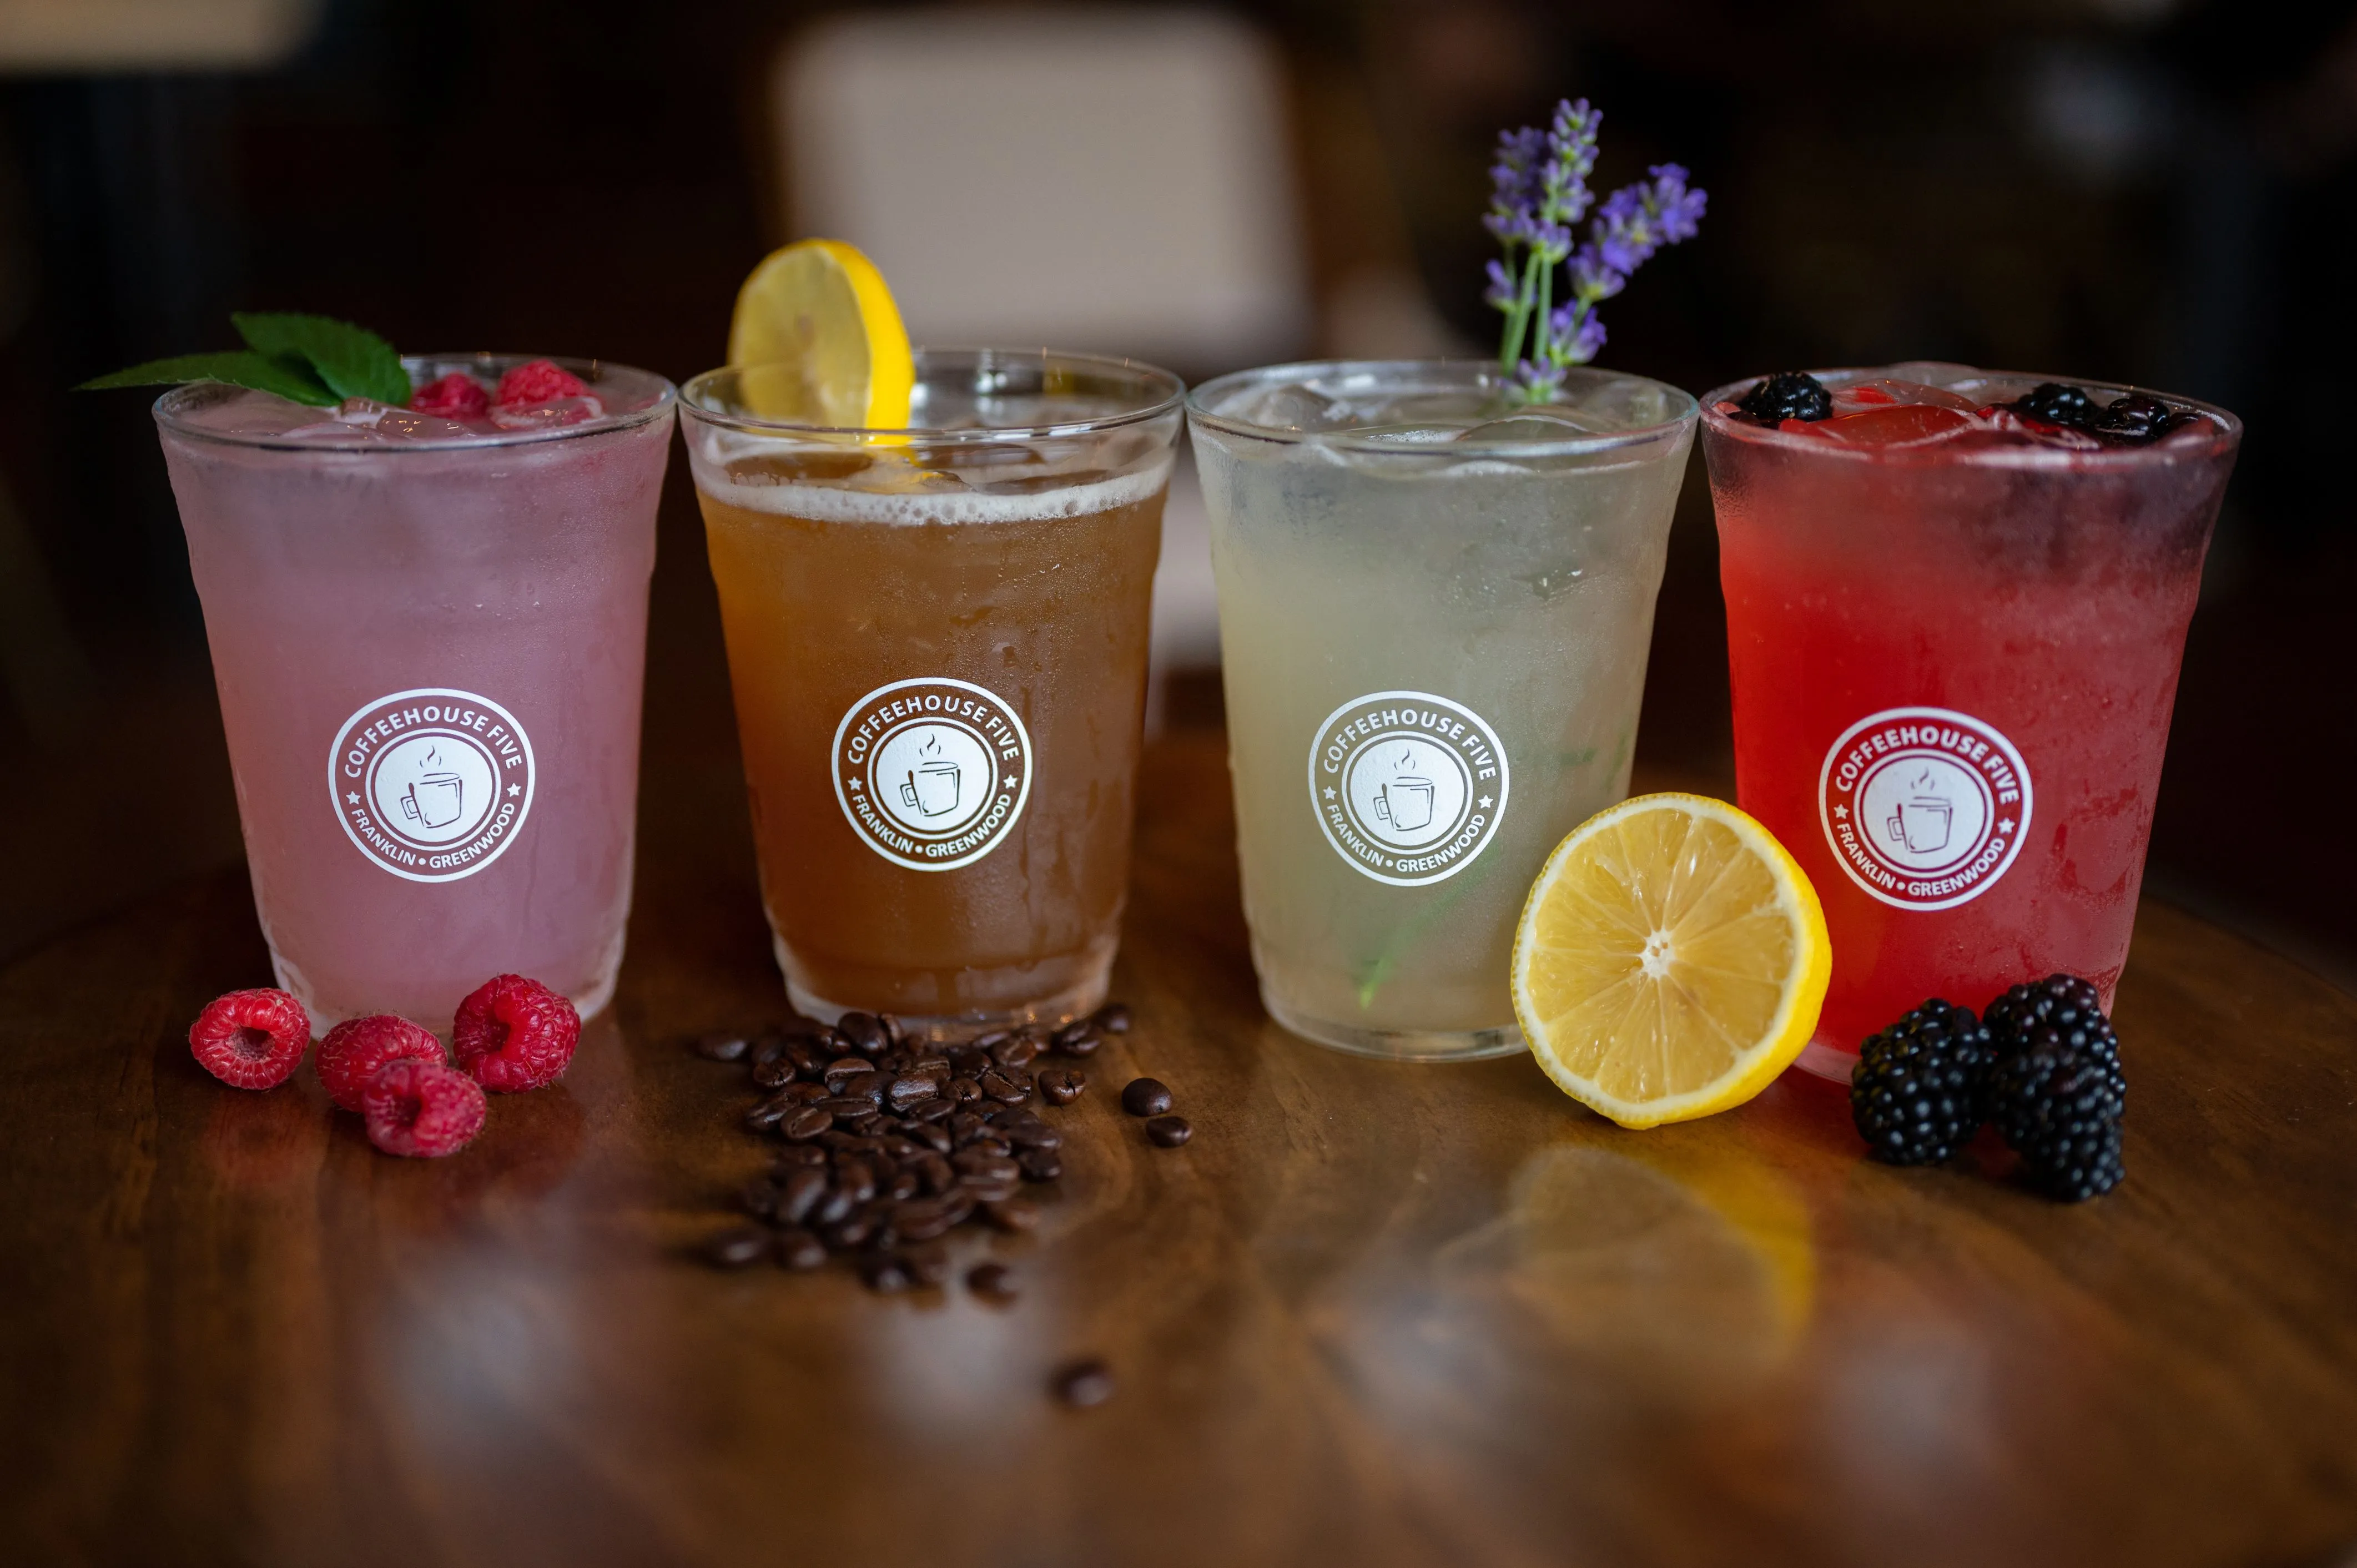 Four specialty drinks in branded glasses, garnished with fresh fruits and coffee beans on a wooden table.